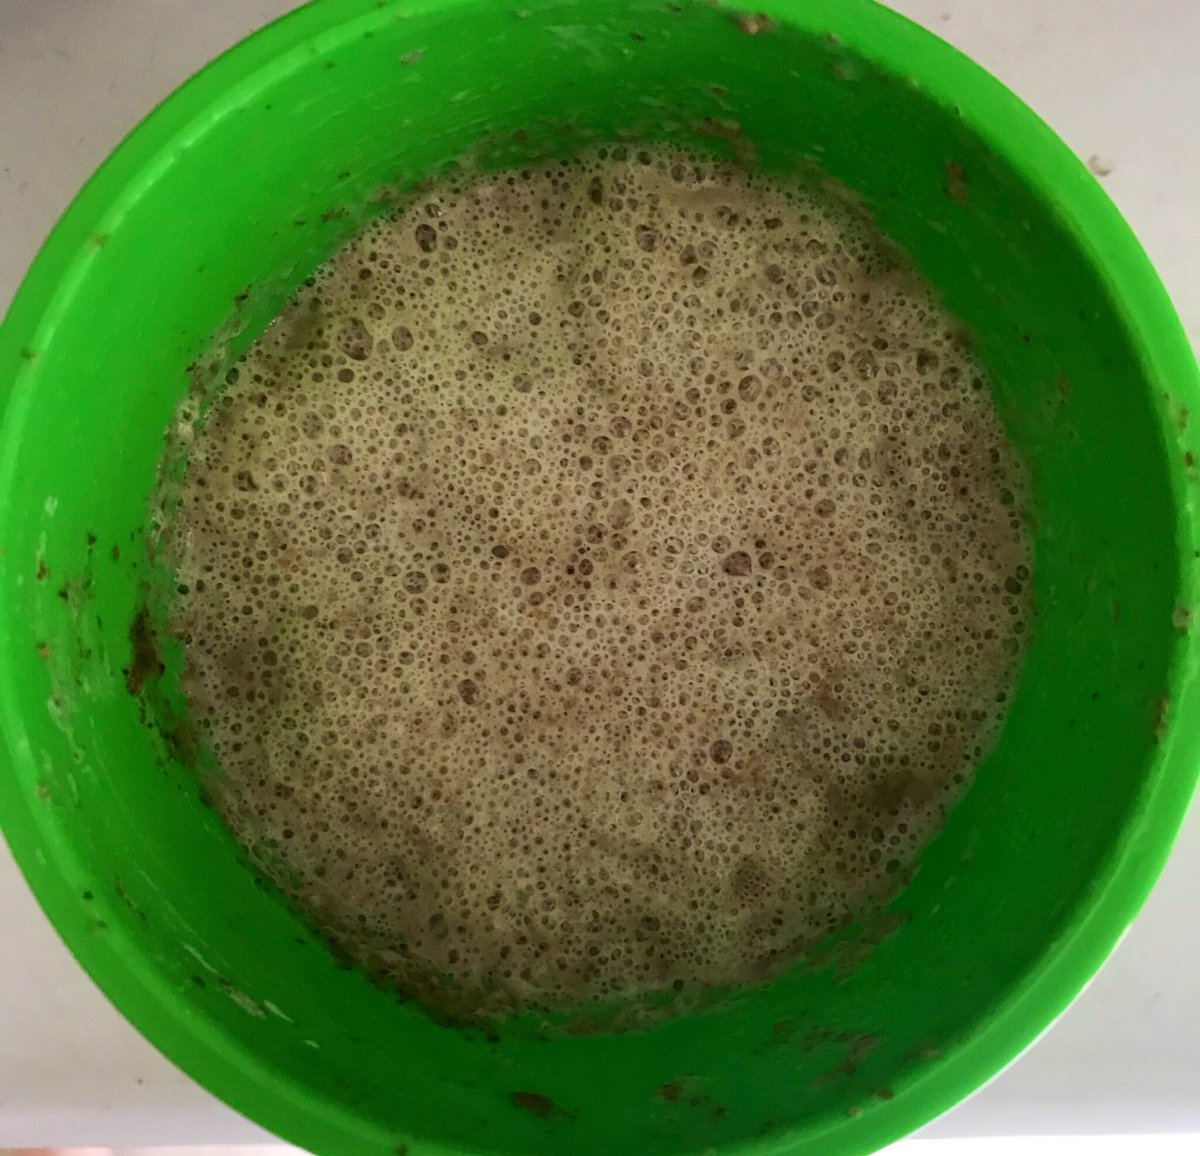 Heres a mega-slo-mo of the process, from today back to the first fermentation. It’s basically froth farming. This is why only incredibly dull people such as me are emotionally able to so this.